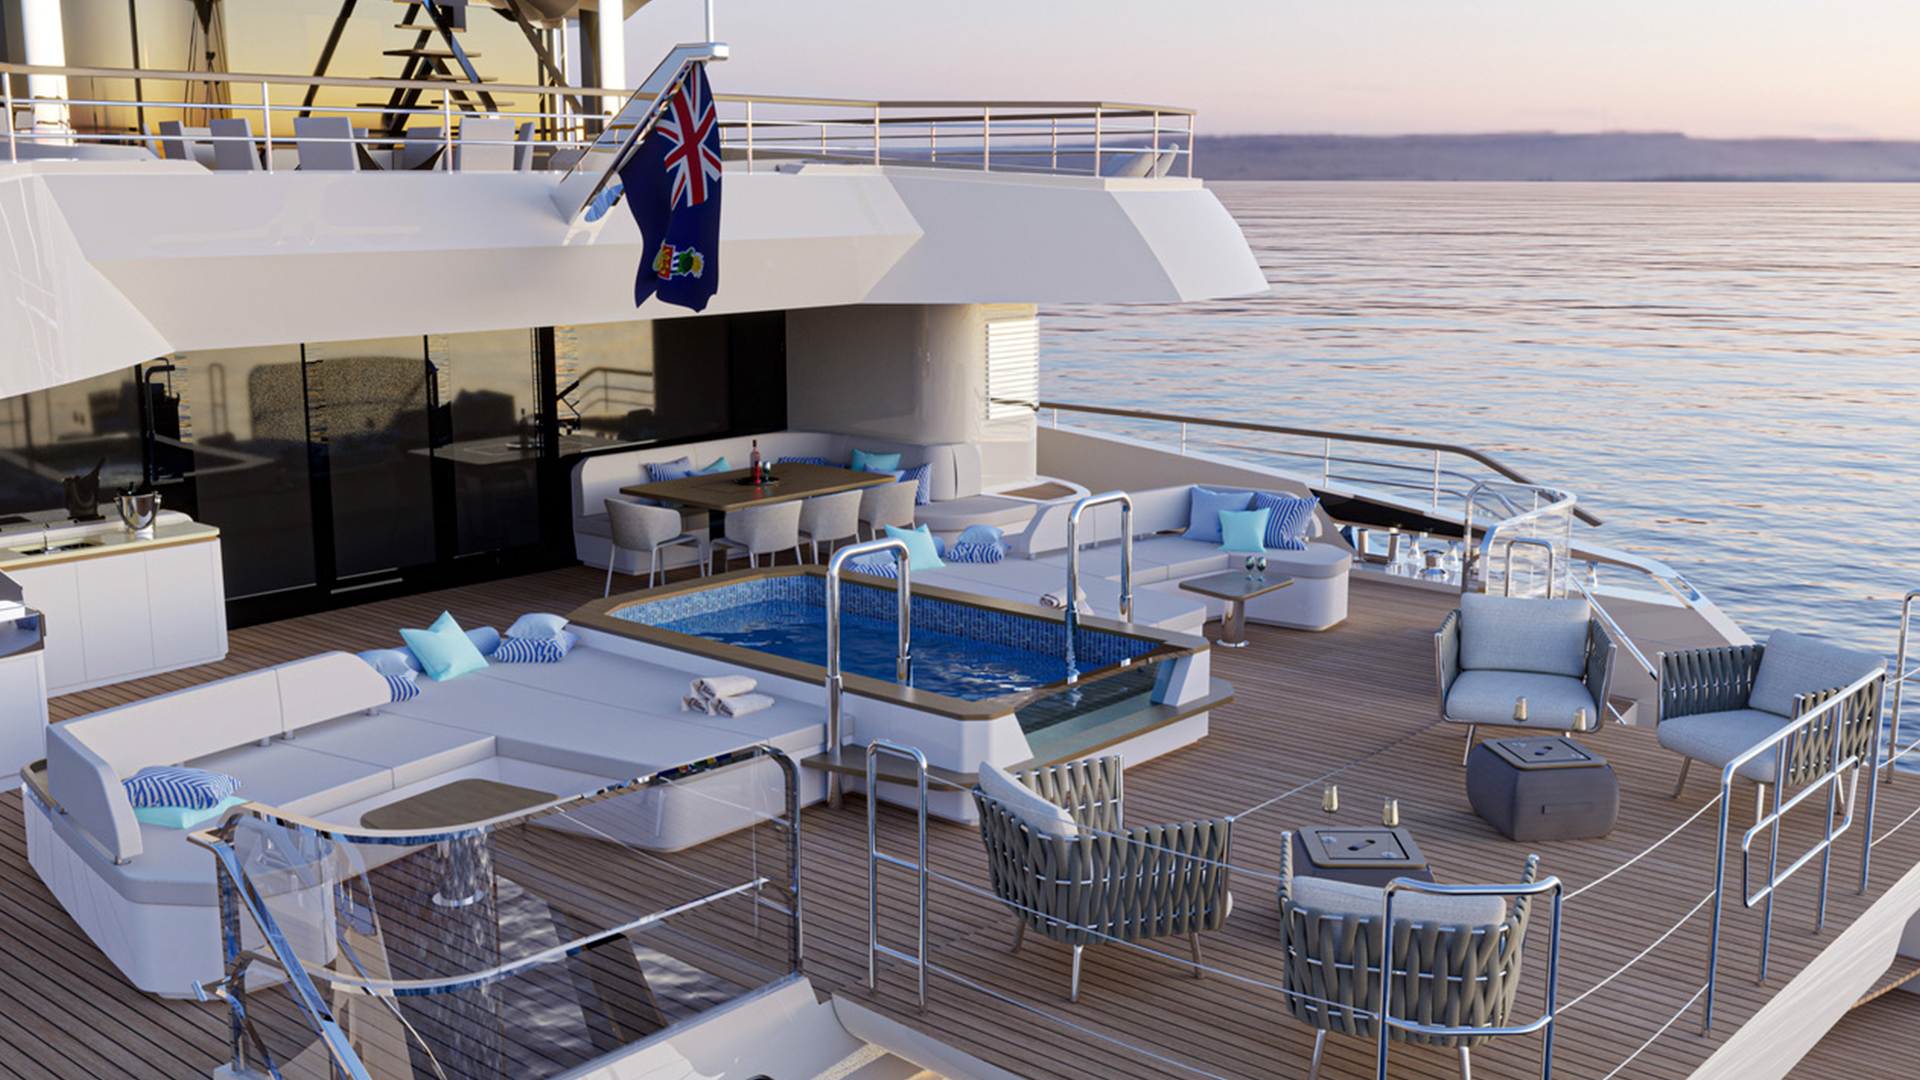 Terrace on the main deck of a yacht with a jacuzzi